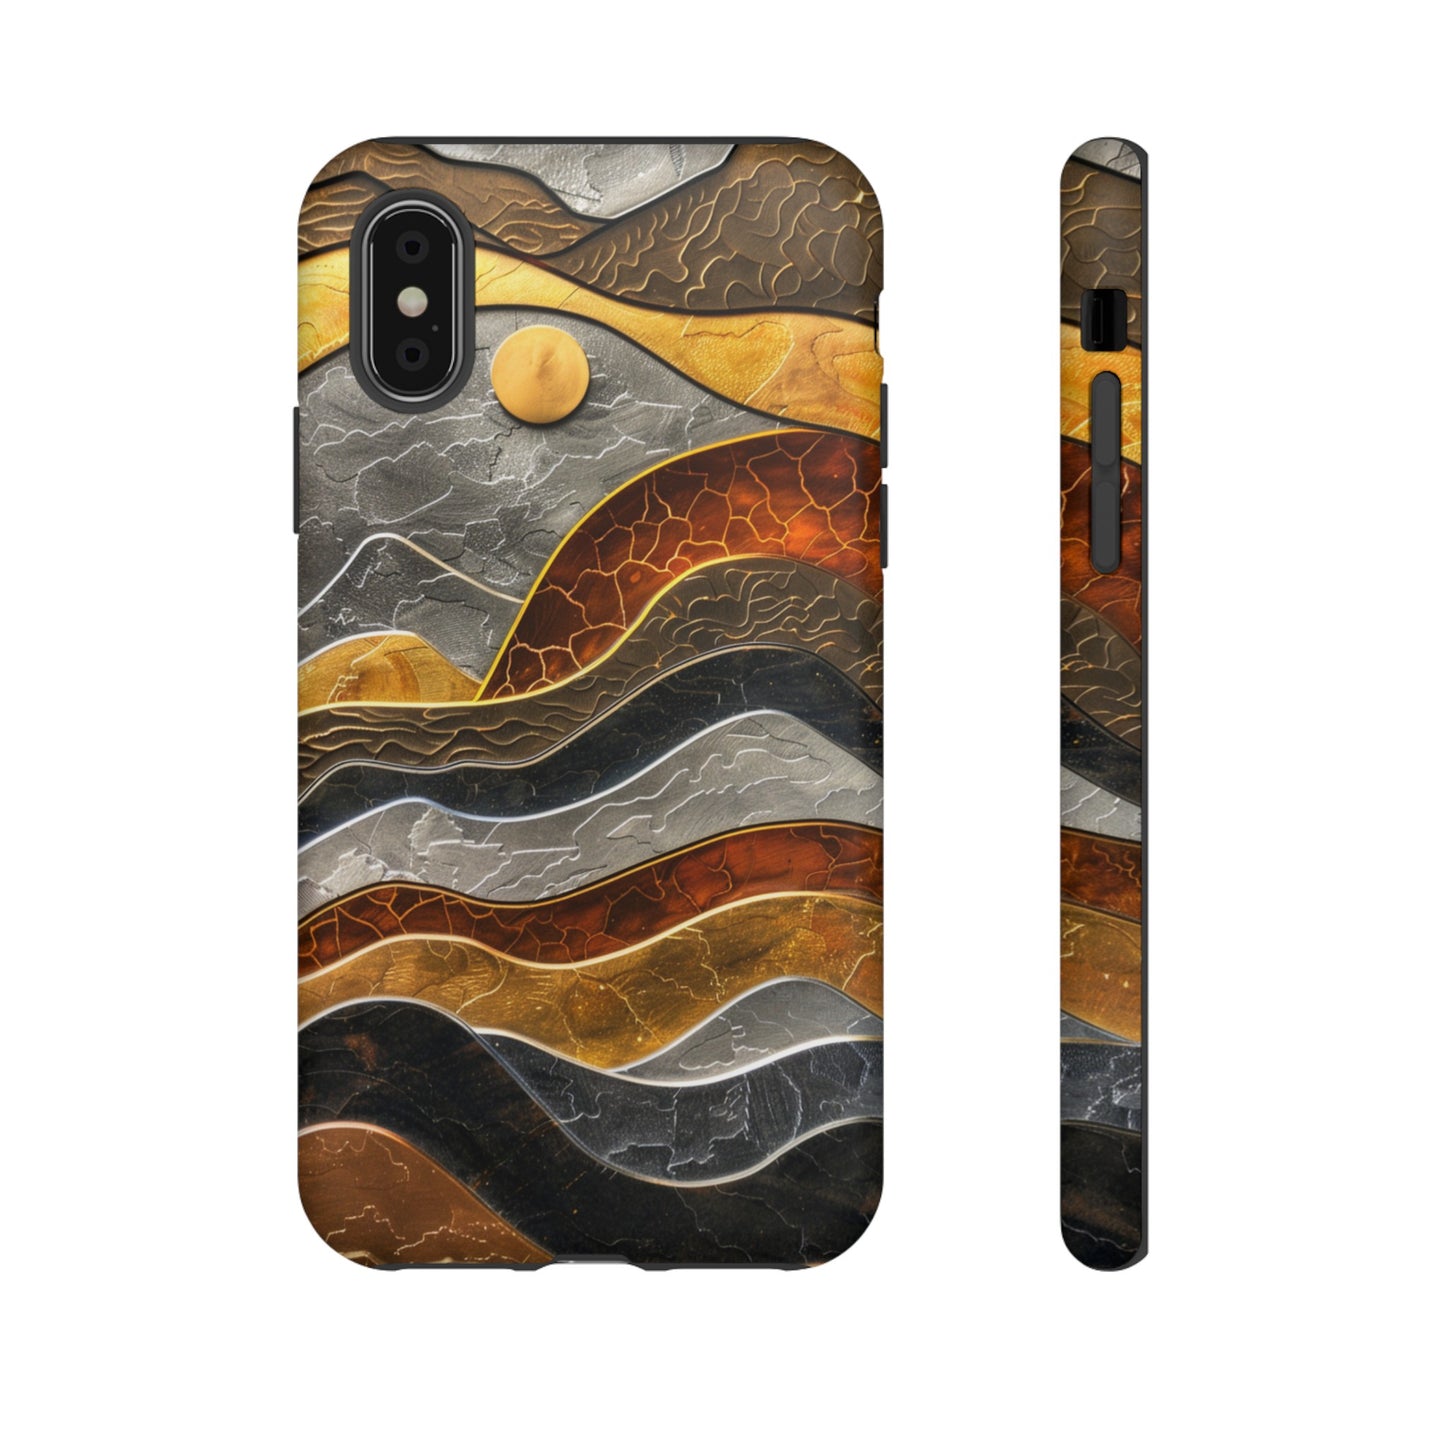 Artistic mountain phone case for Google Pixel